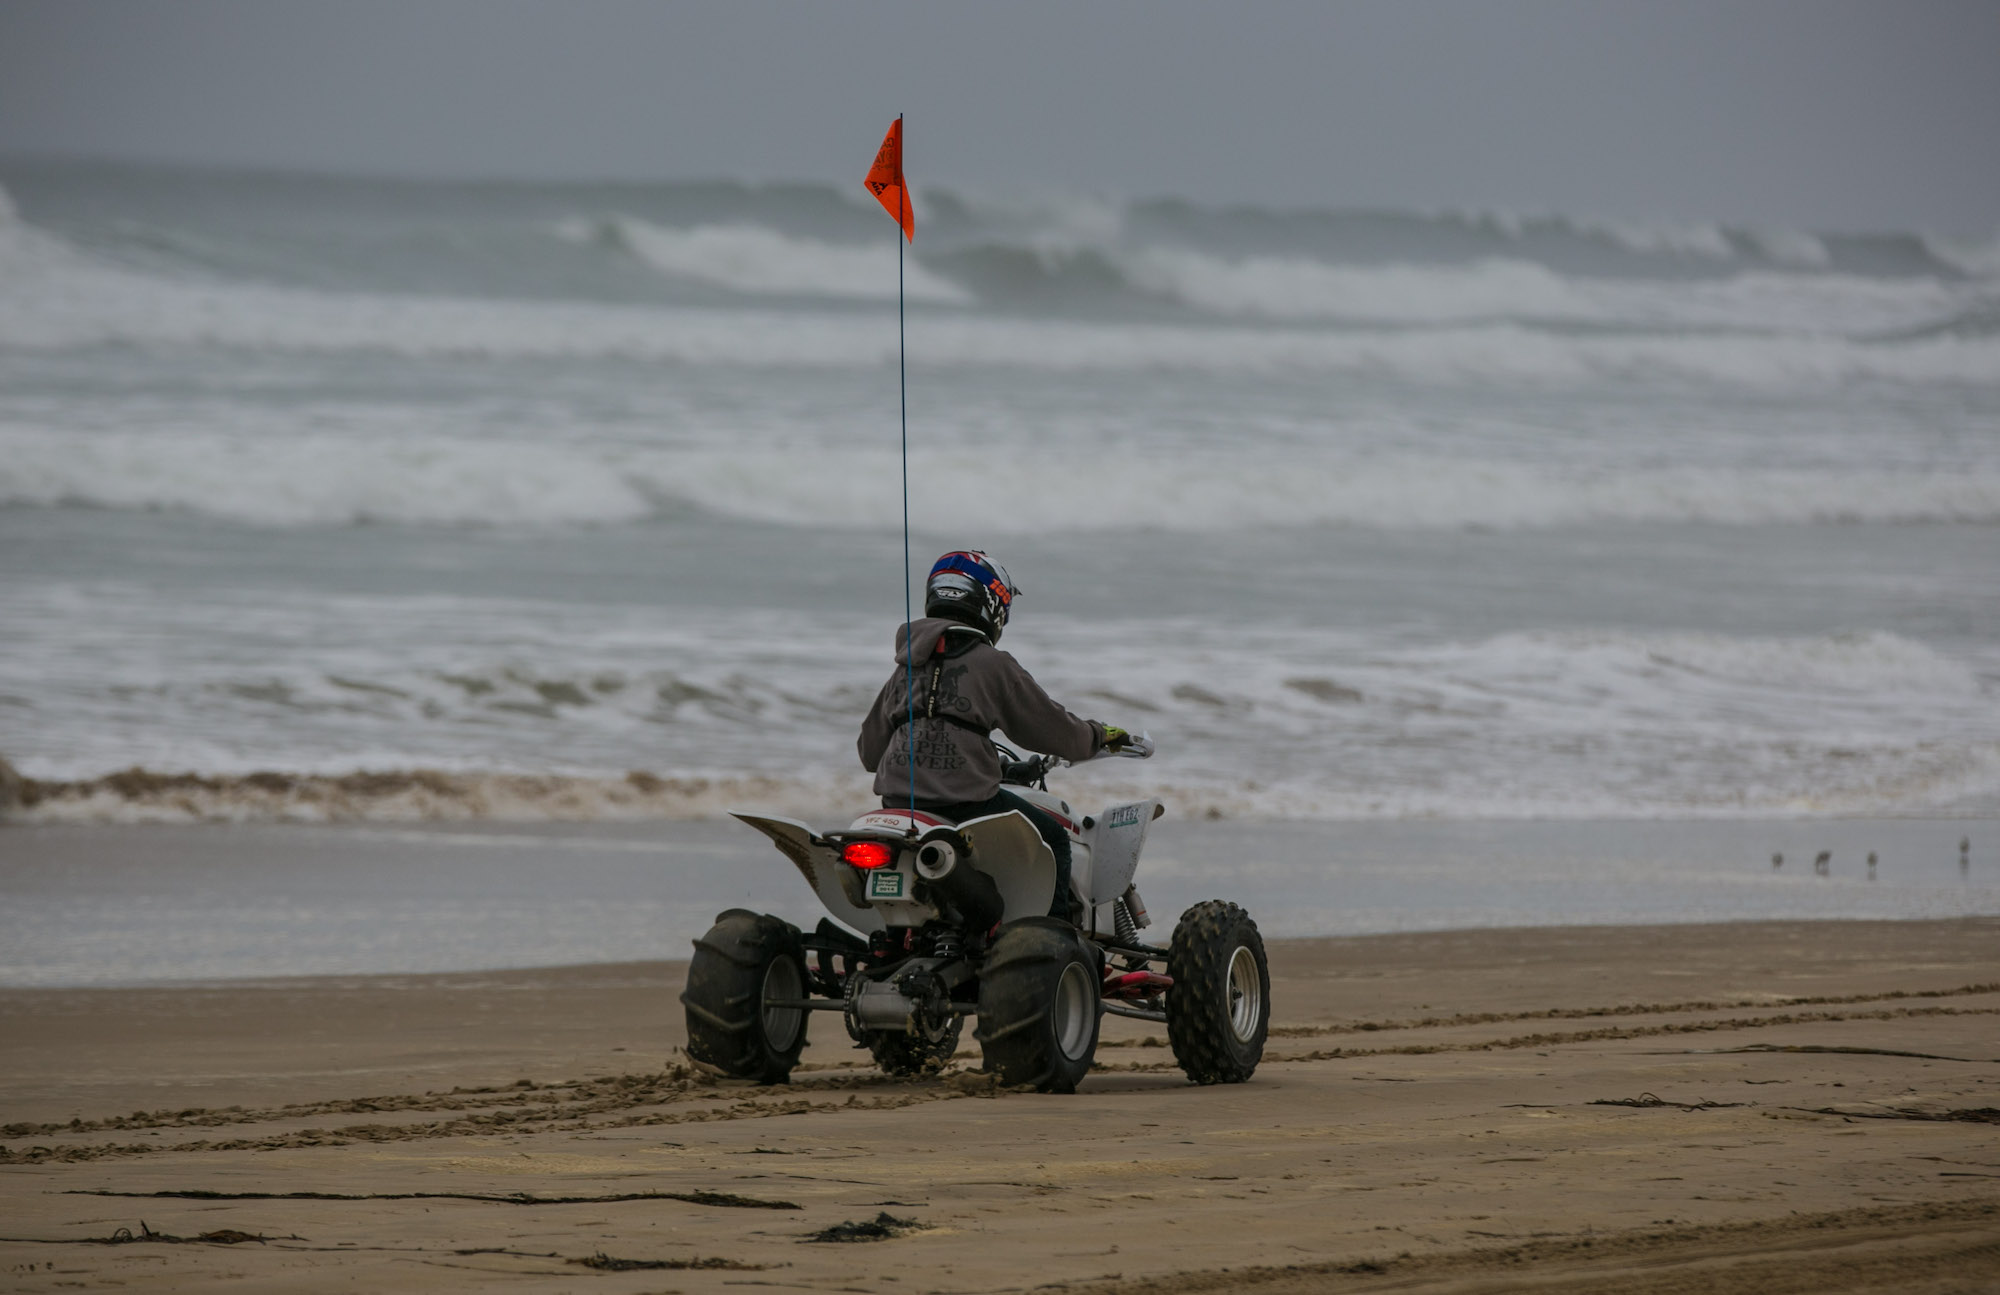 A boy rides an ATV on the sand in Oceano Dunes Preserve in California in November 2016